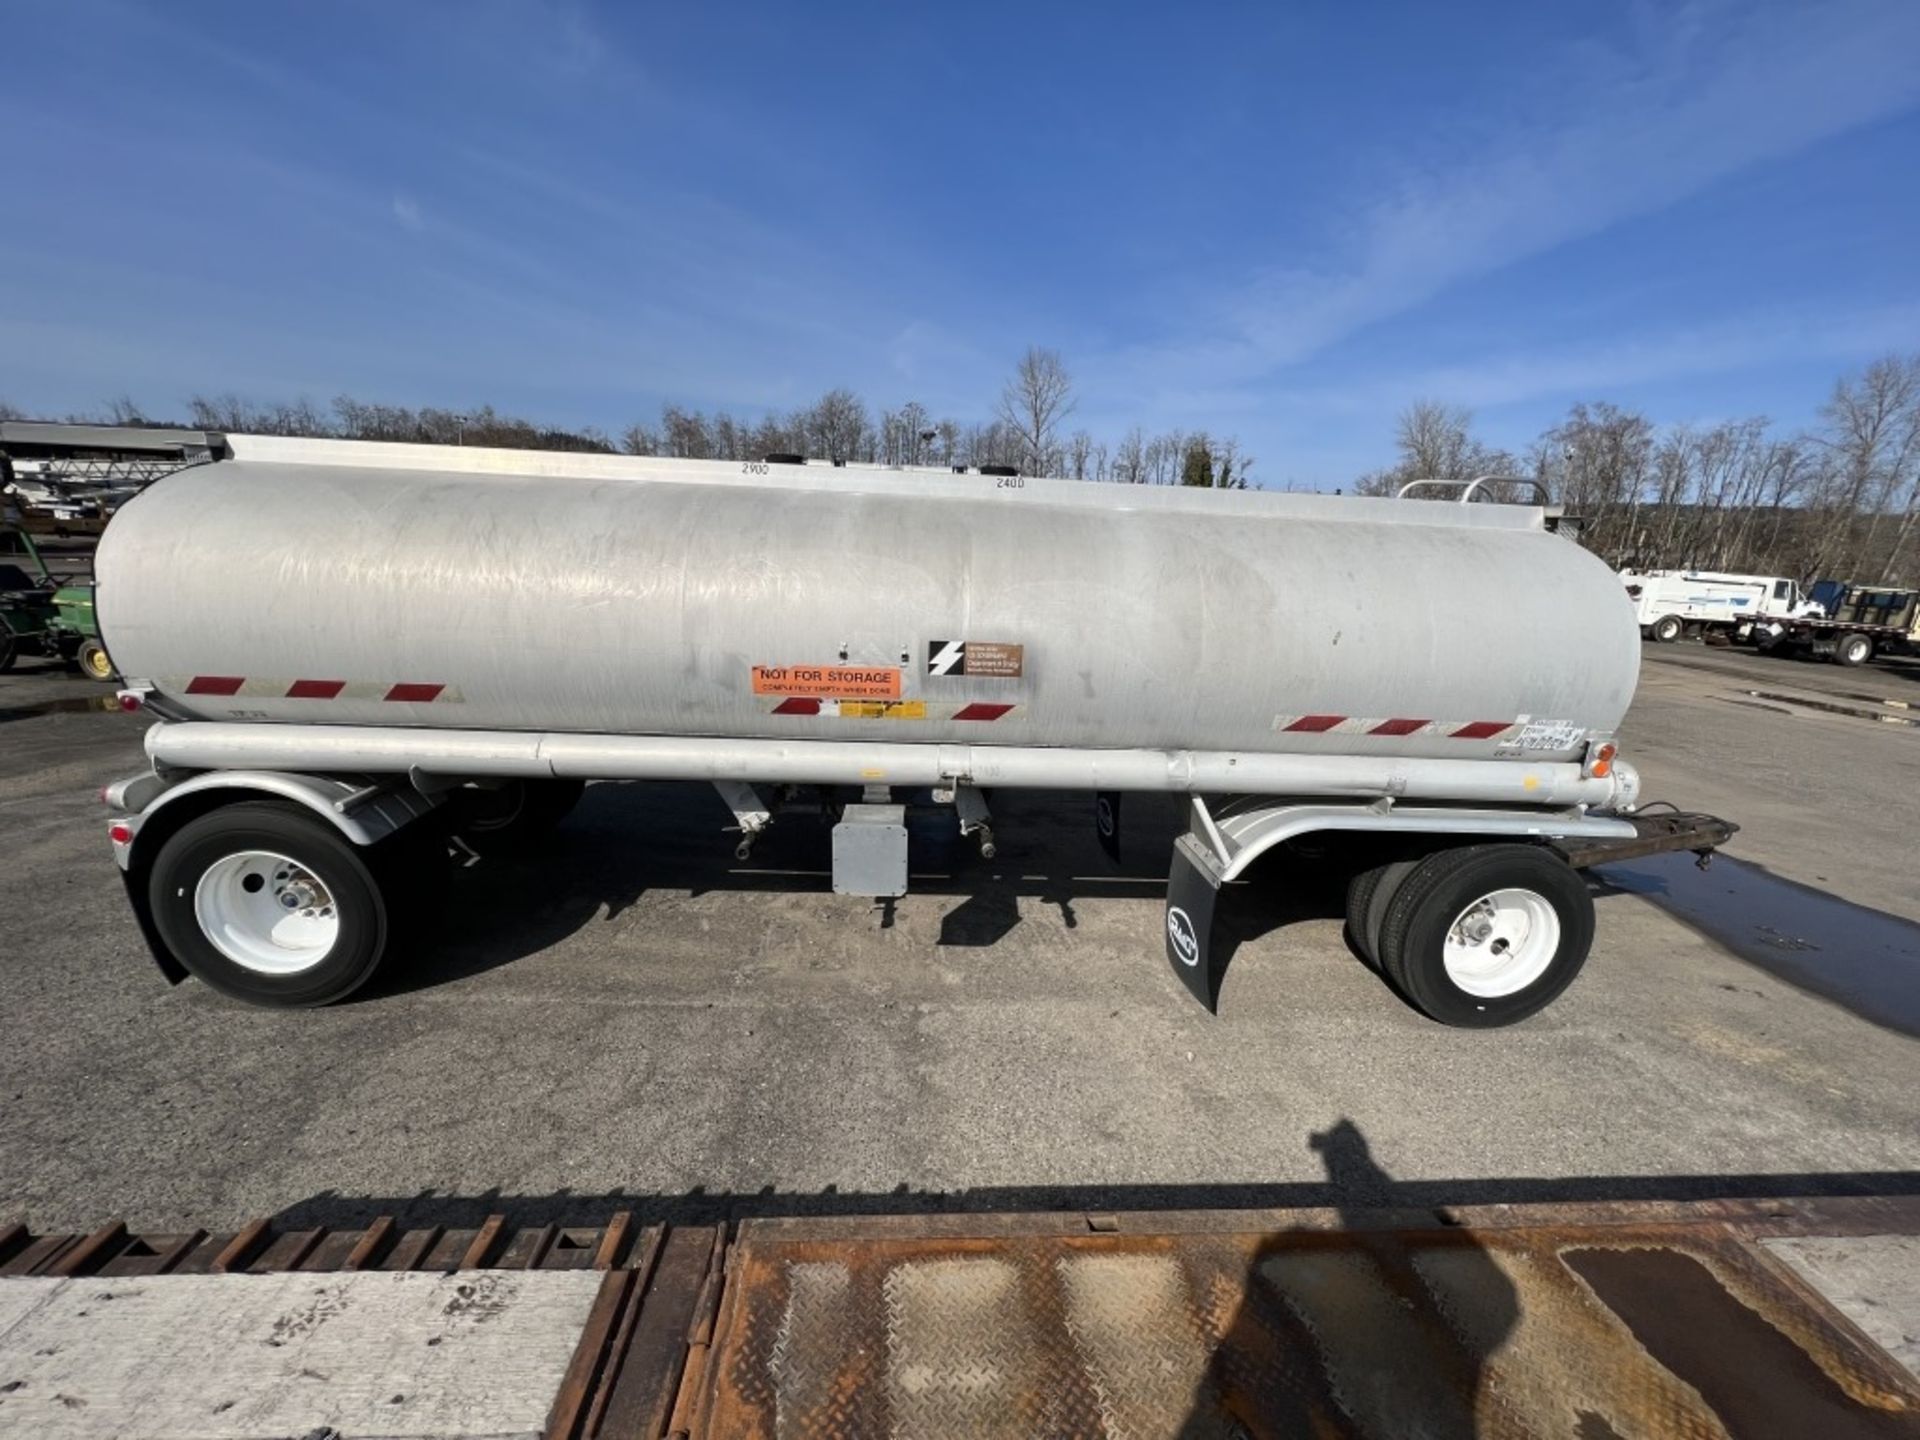 1973 Beal T/A Pup Tanker Trailer - Image 3 of 23